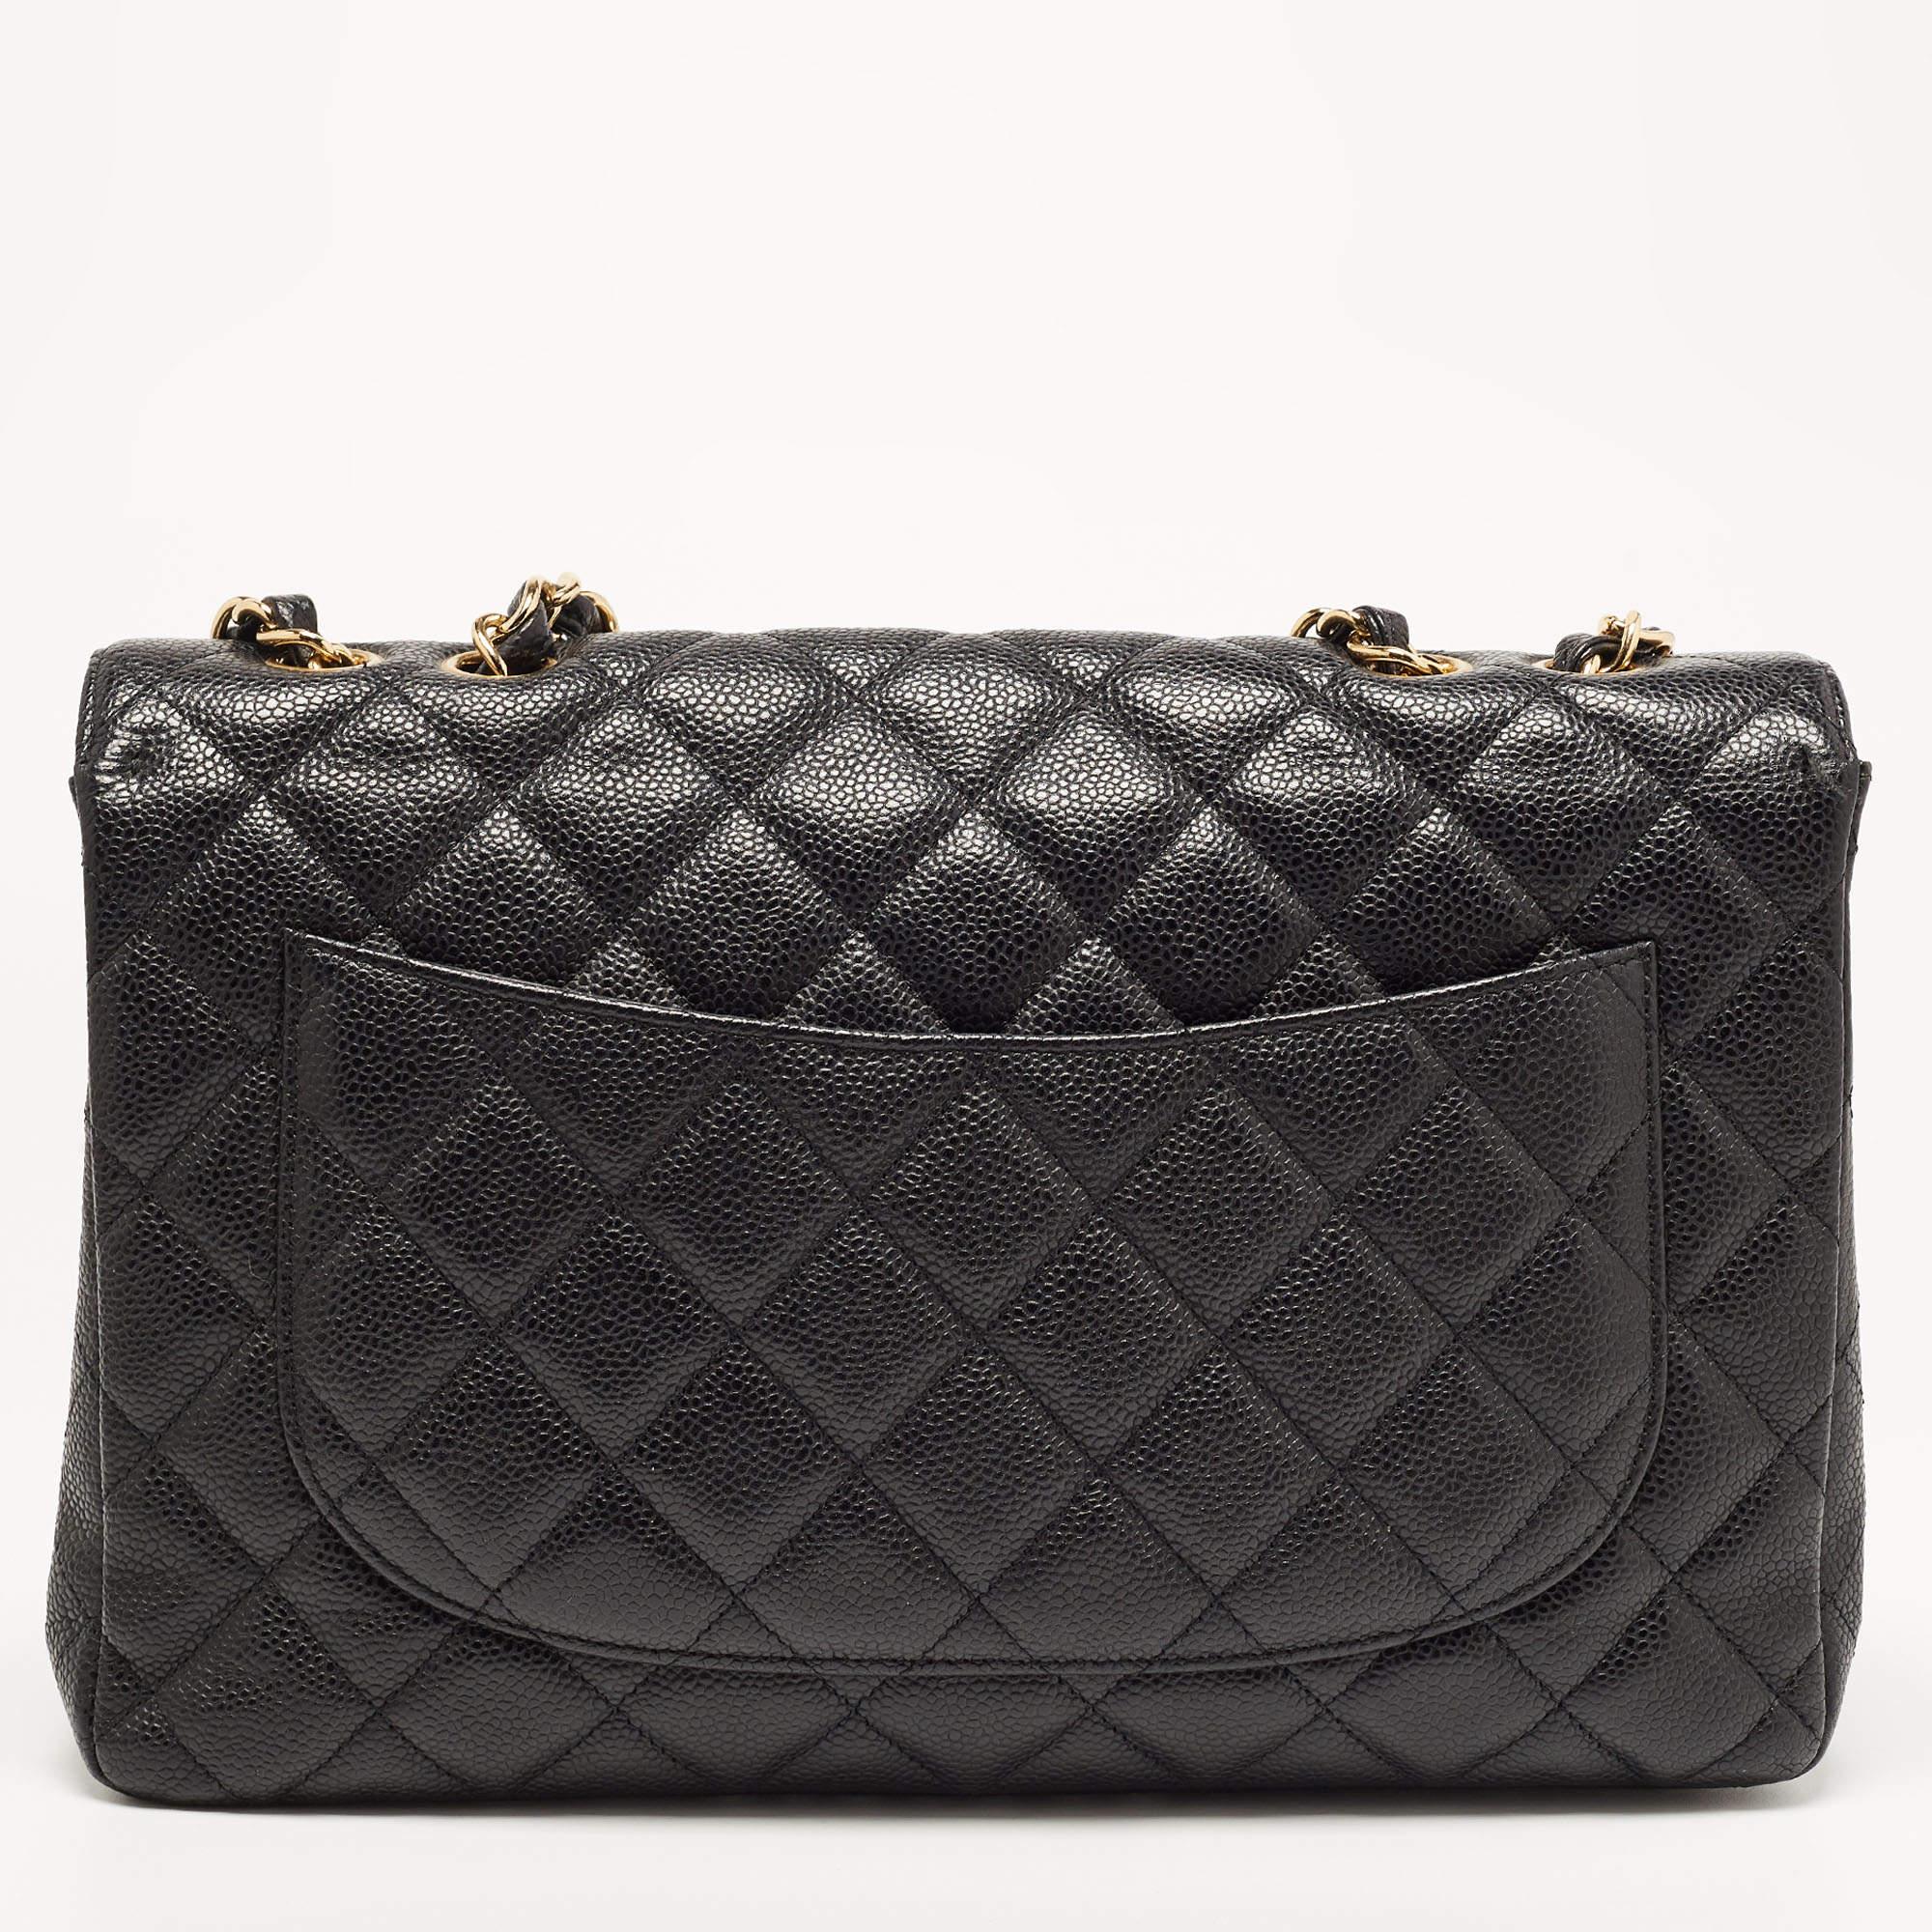 Exquisitely crafted from Caviar leather in their quilt design, this Classic Double Flap has the iconic CC turn-lock on the flap. The piece has gold-tone hardware, and a lovely chain link just so you can easily parade it.

